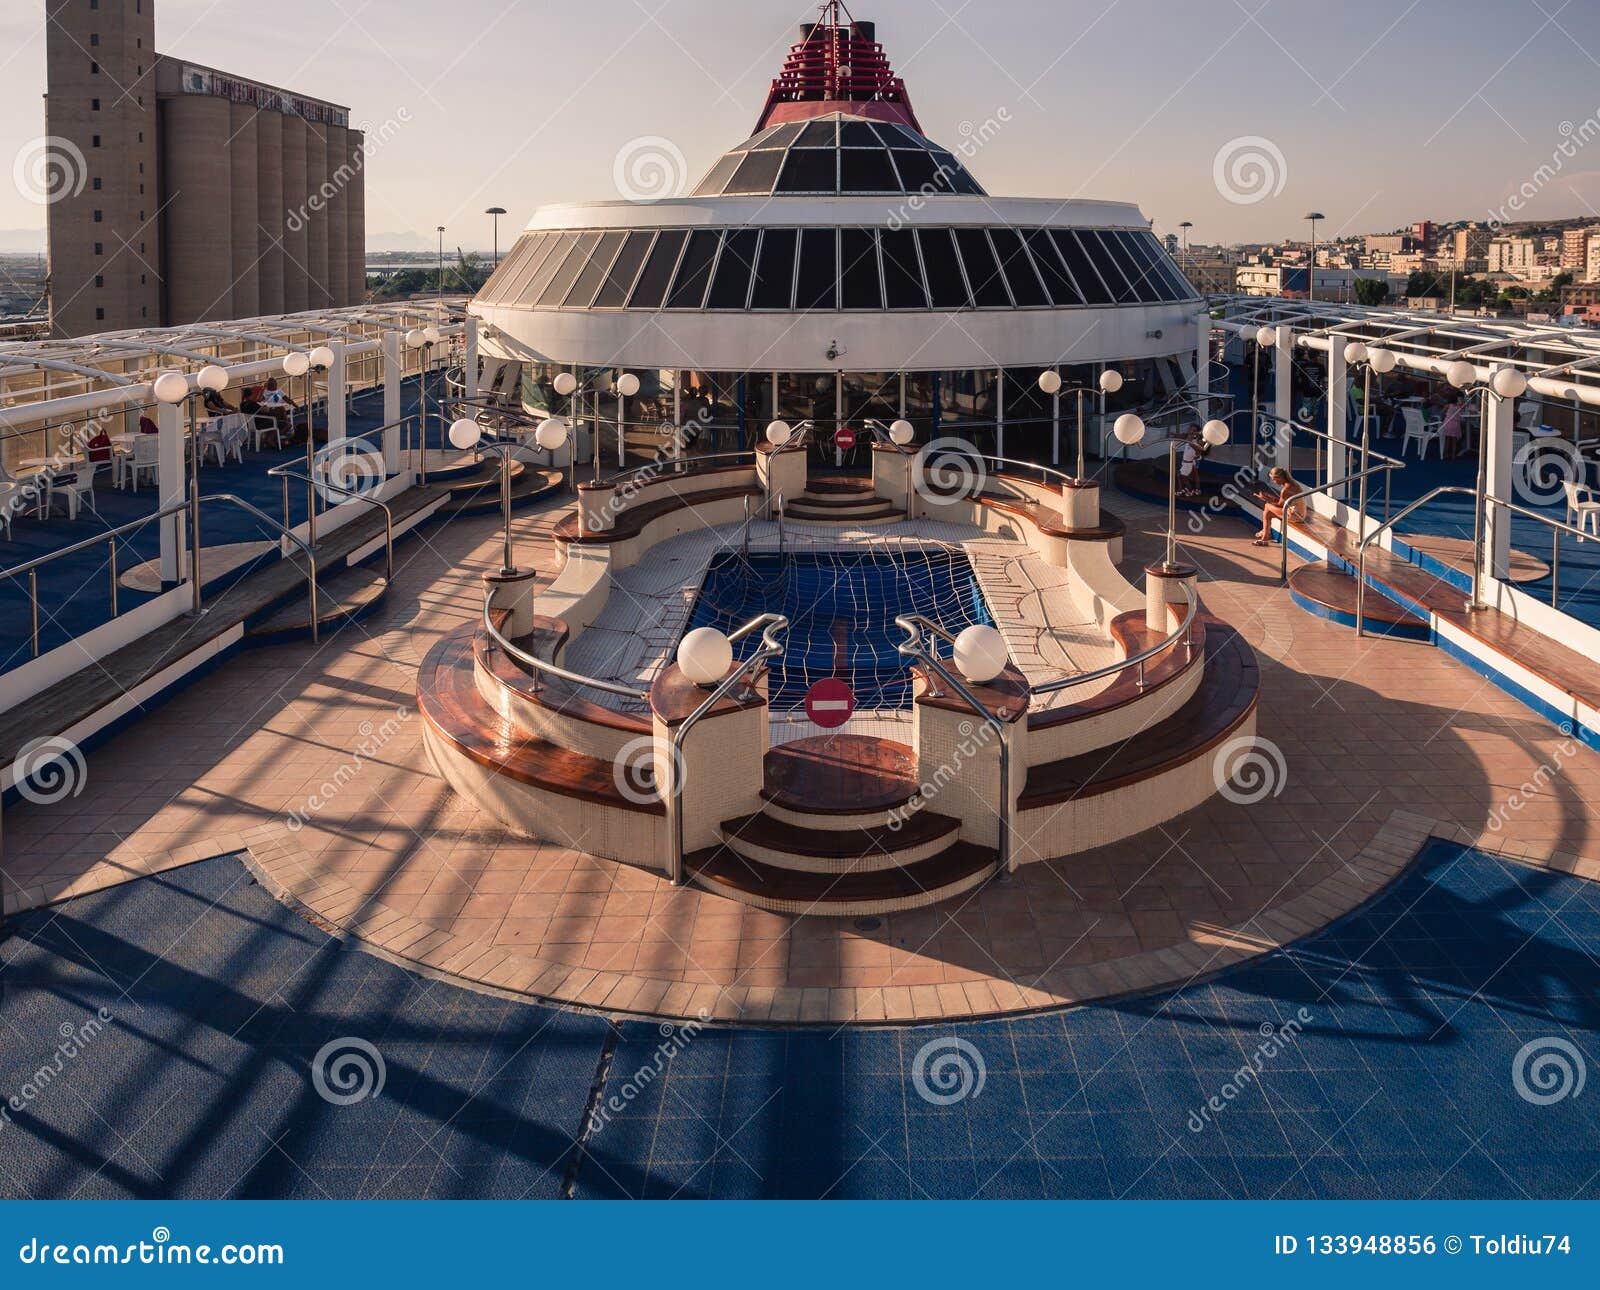 Upper Deck Of A Ferry With Swimming Pool At Sunset Editorial